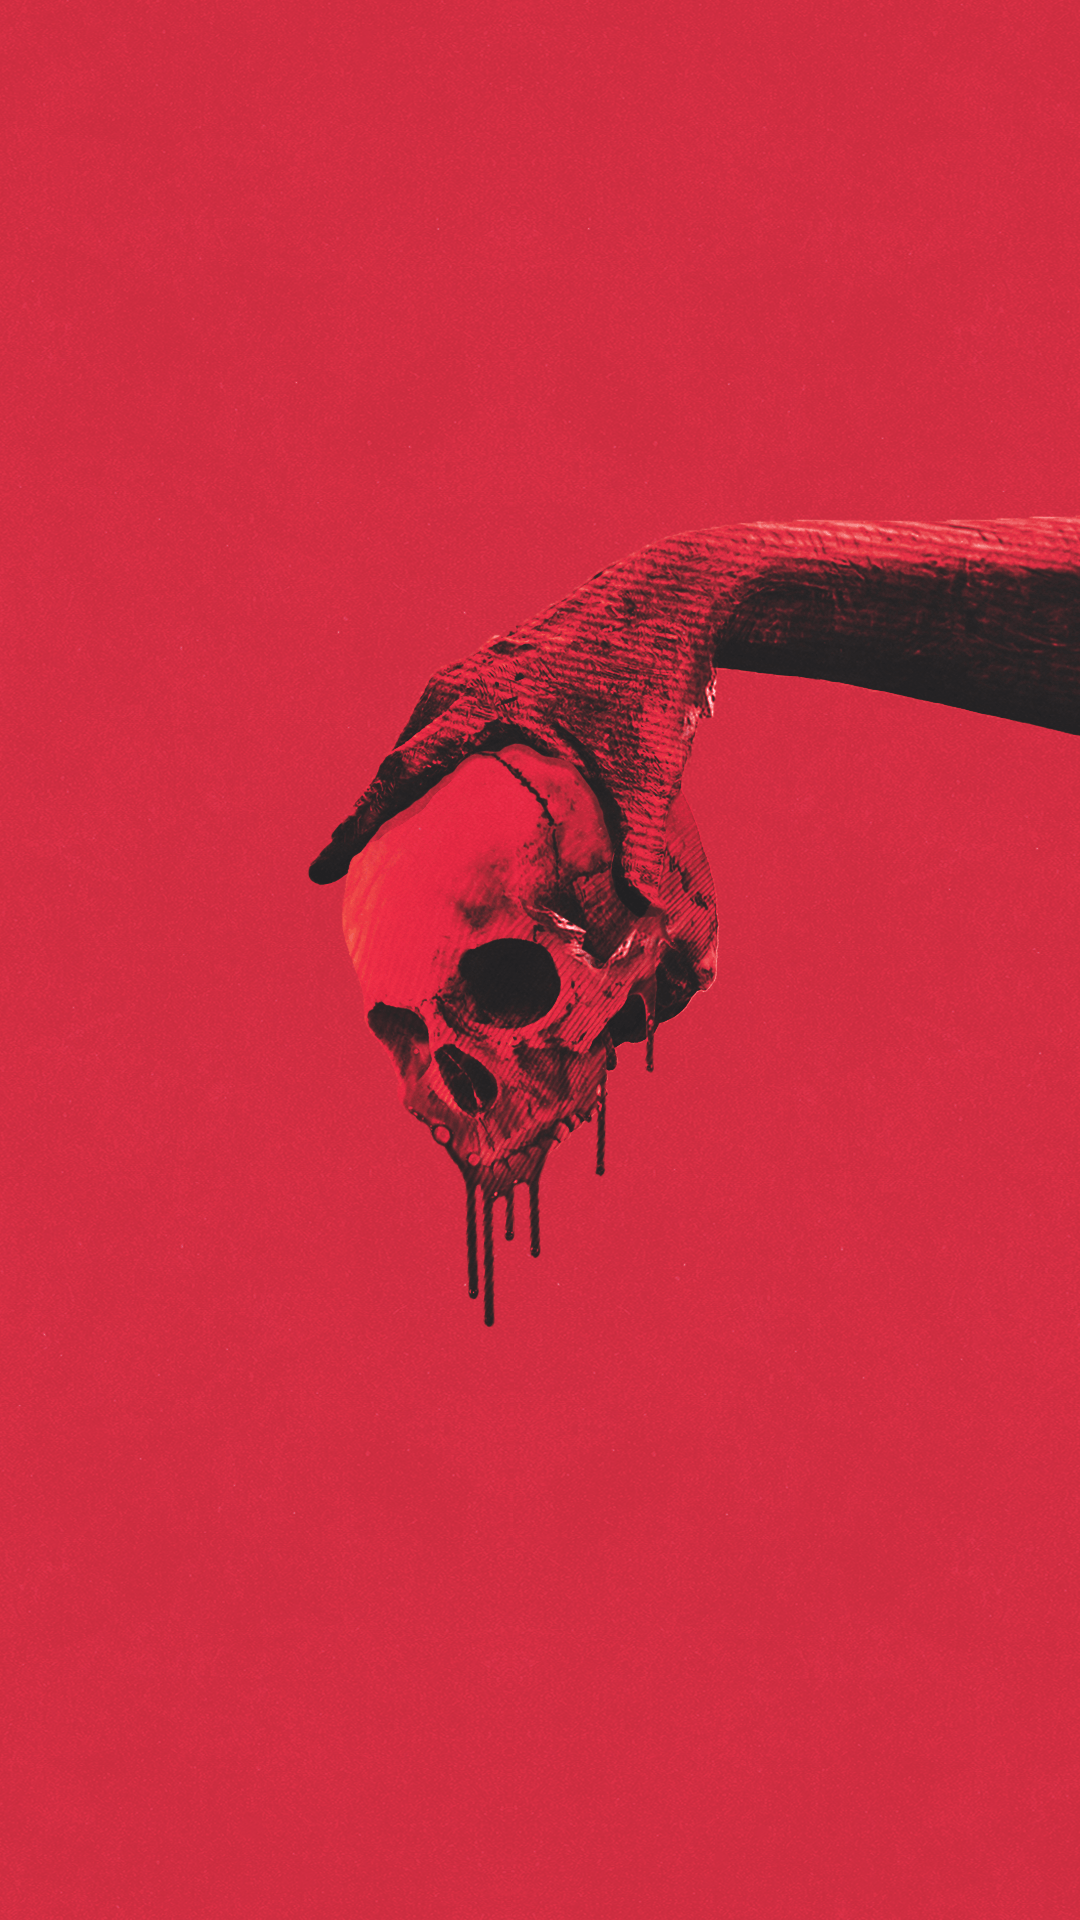 A red image of a hand holding a skull with blood dripping off of it - Creepy, skull